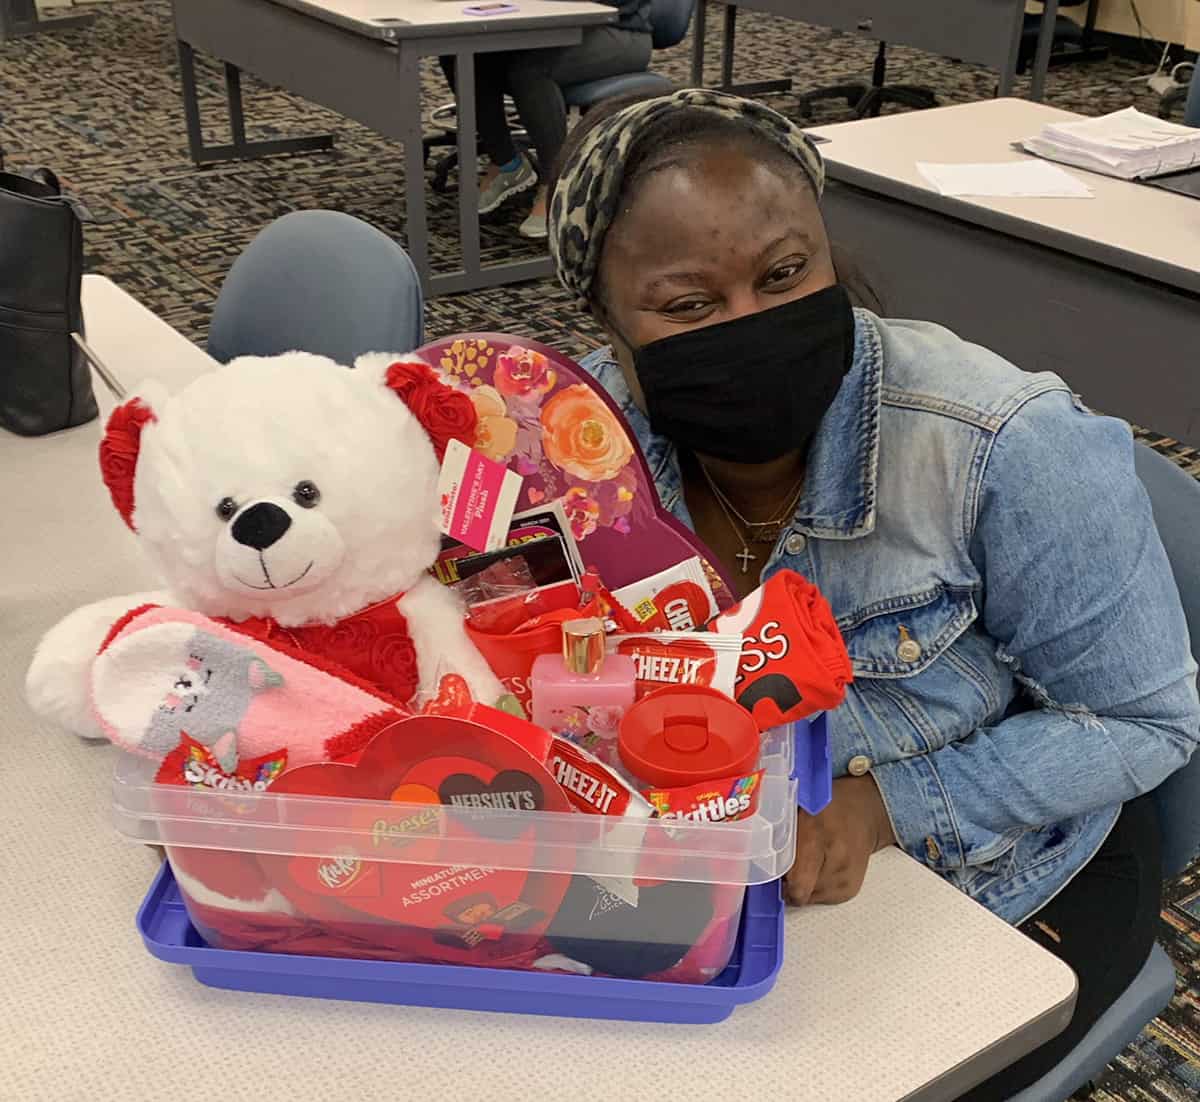 Jasmin Robinson is shown above with her Valentine's gift basket.